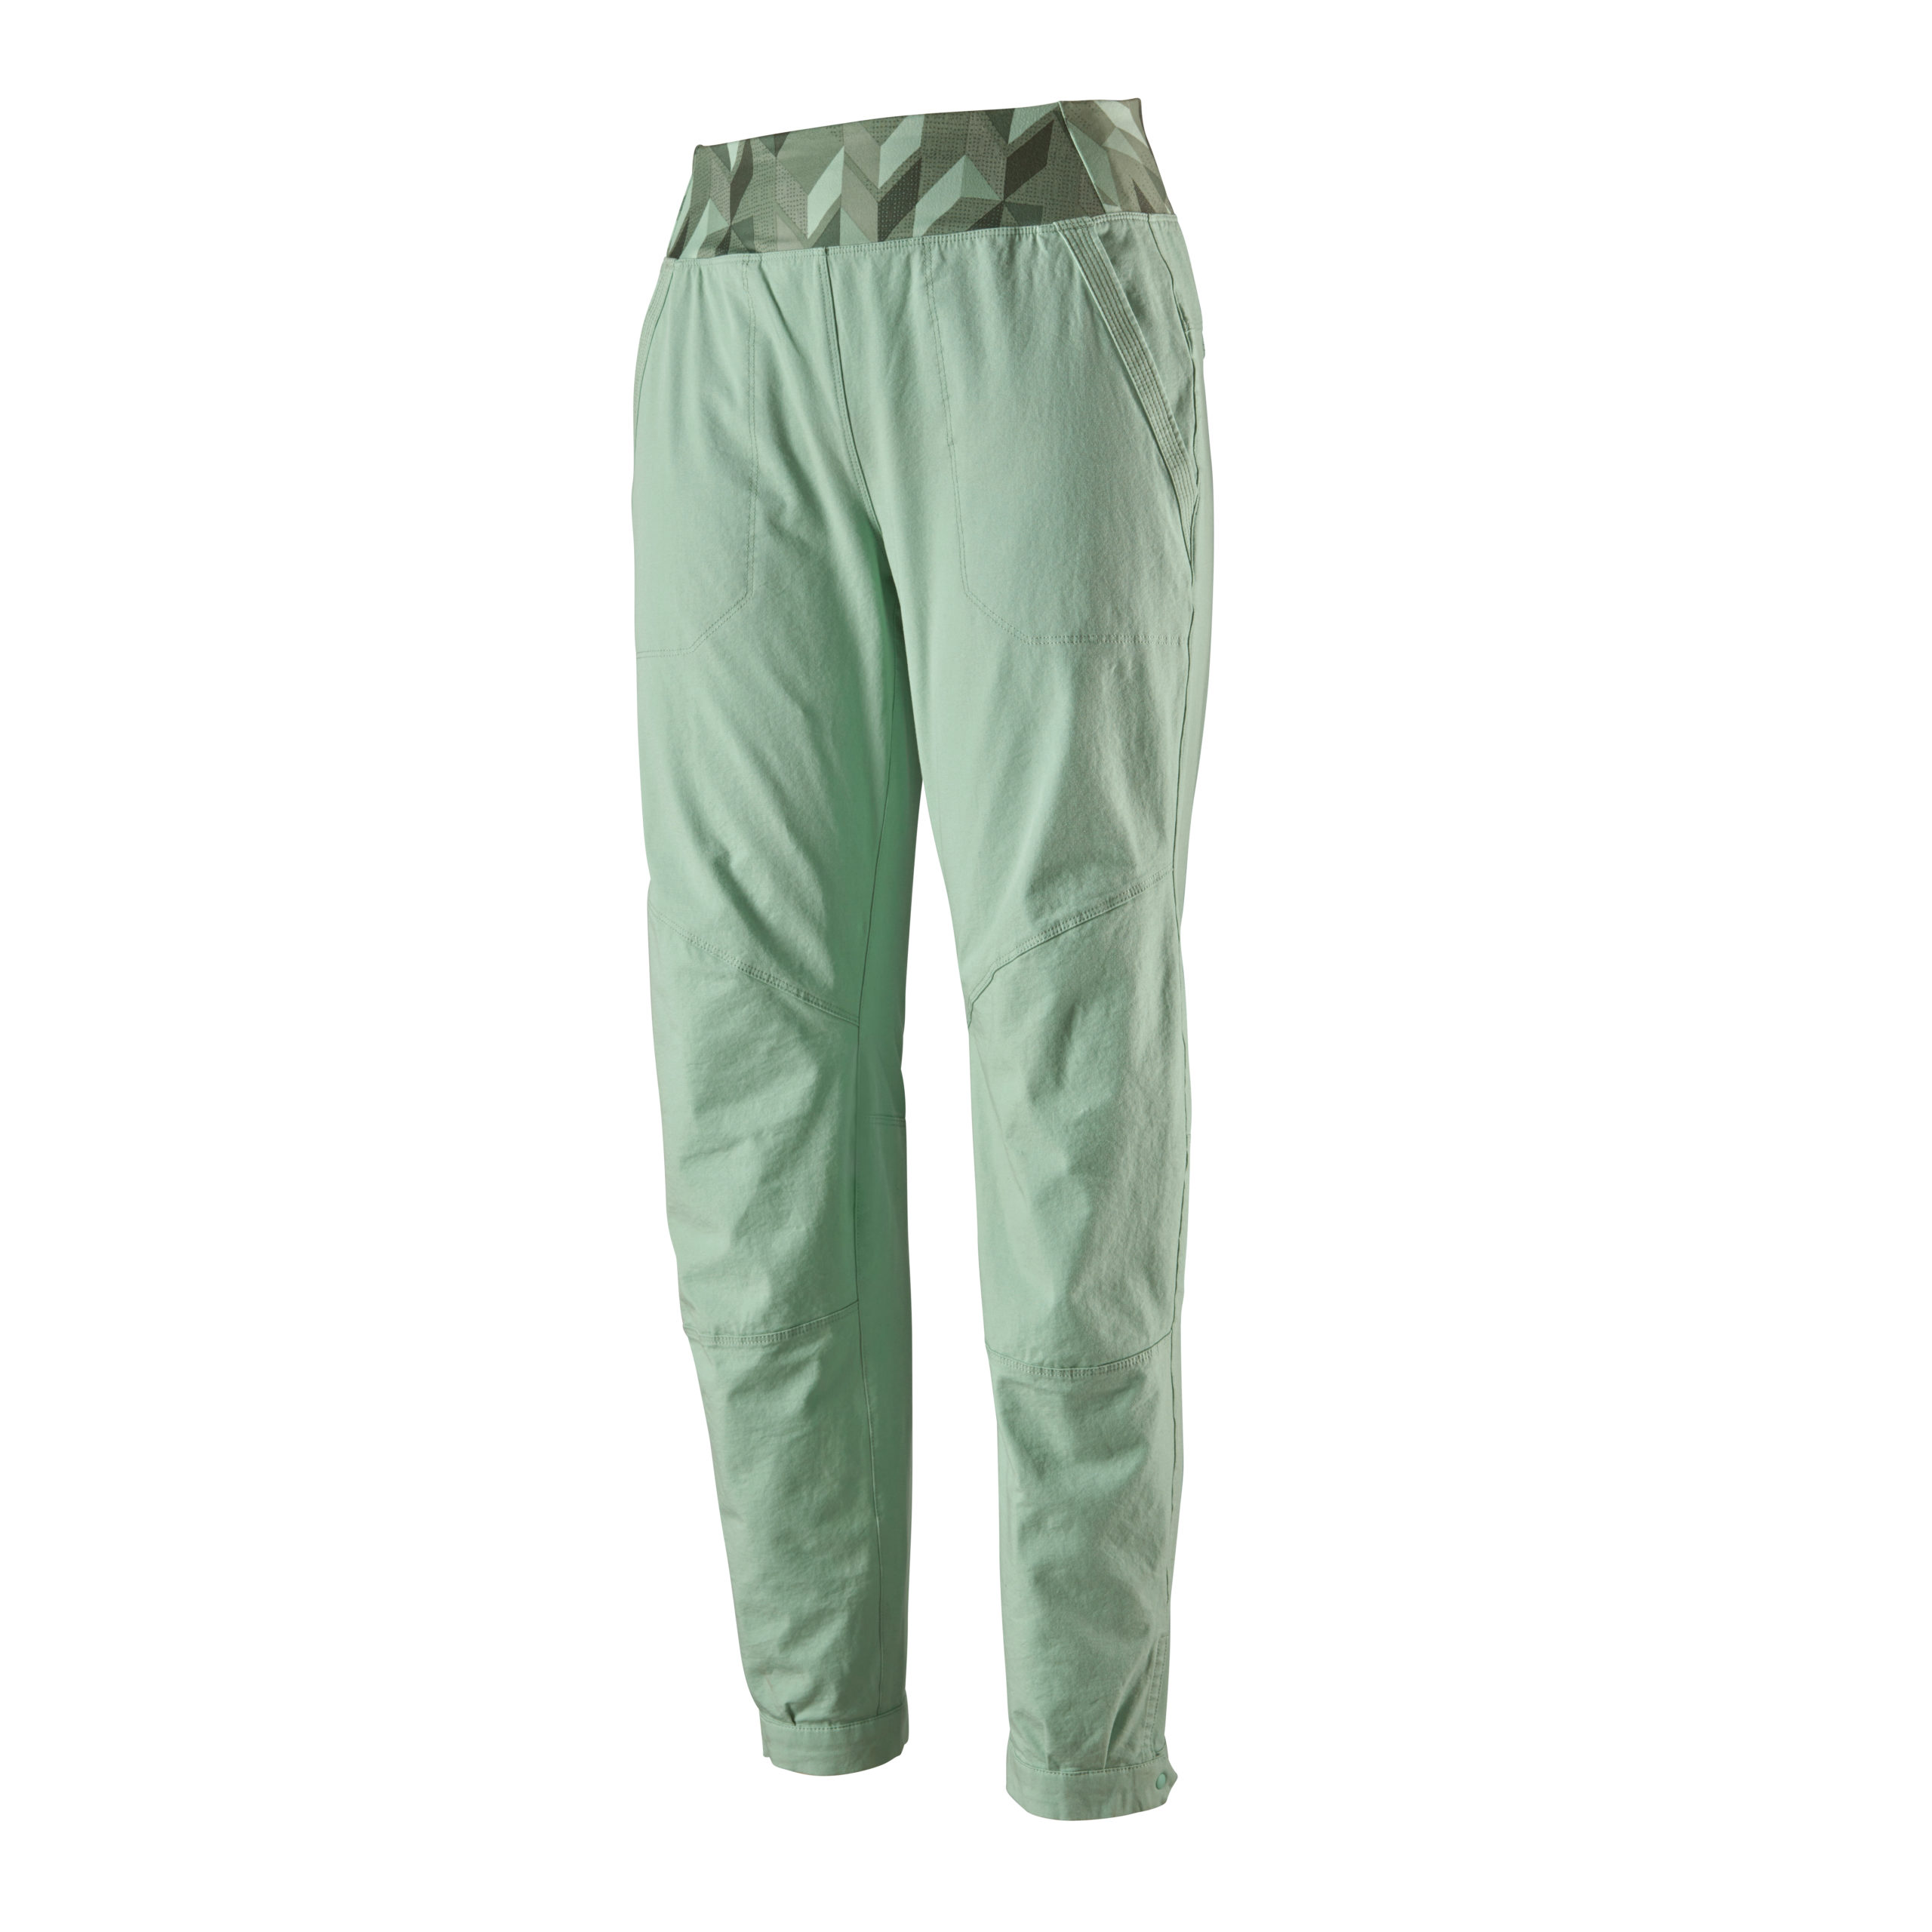 Patagonia W's Caliza Rock Pants - The Pill Outdoor Journal